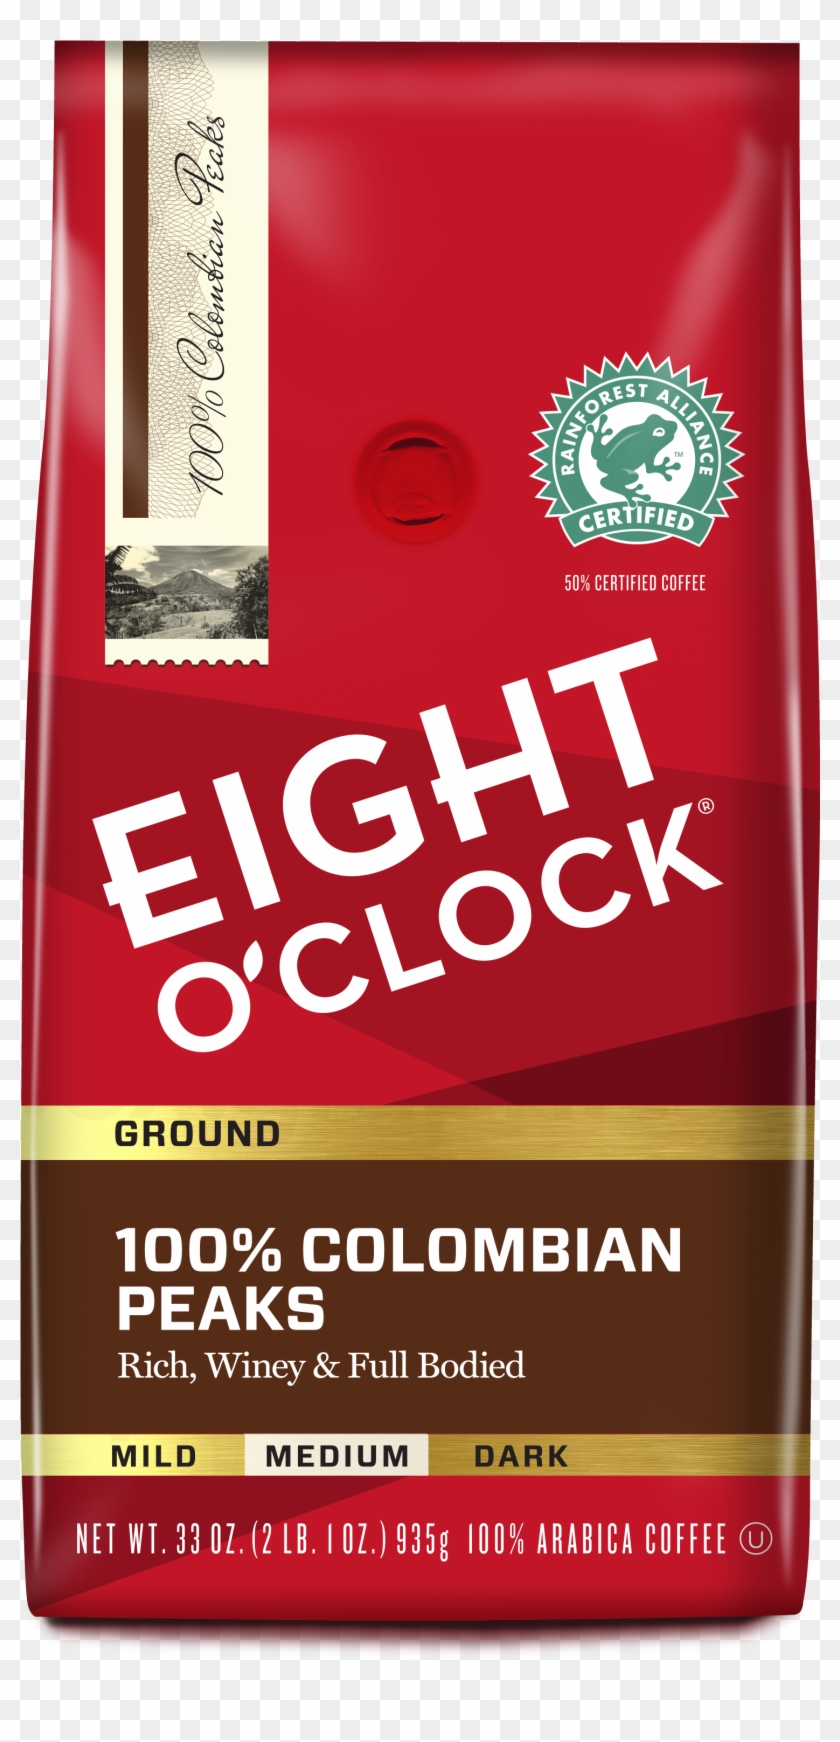 Eight O'clock 100% Colombian Peaks Ground Coffee 33 - Packaging And Labeling Clipart